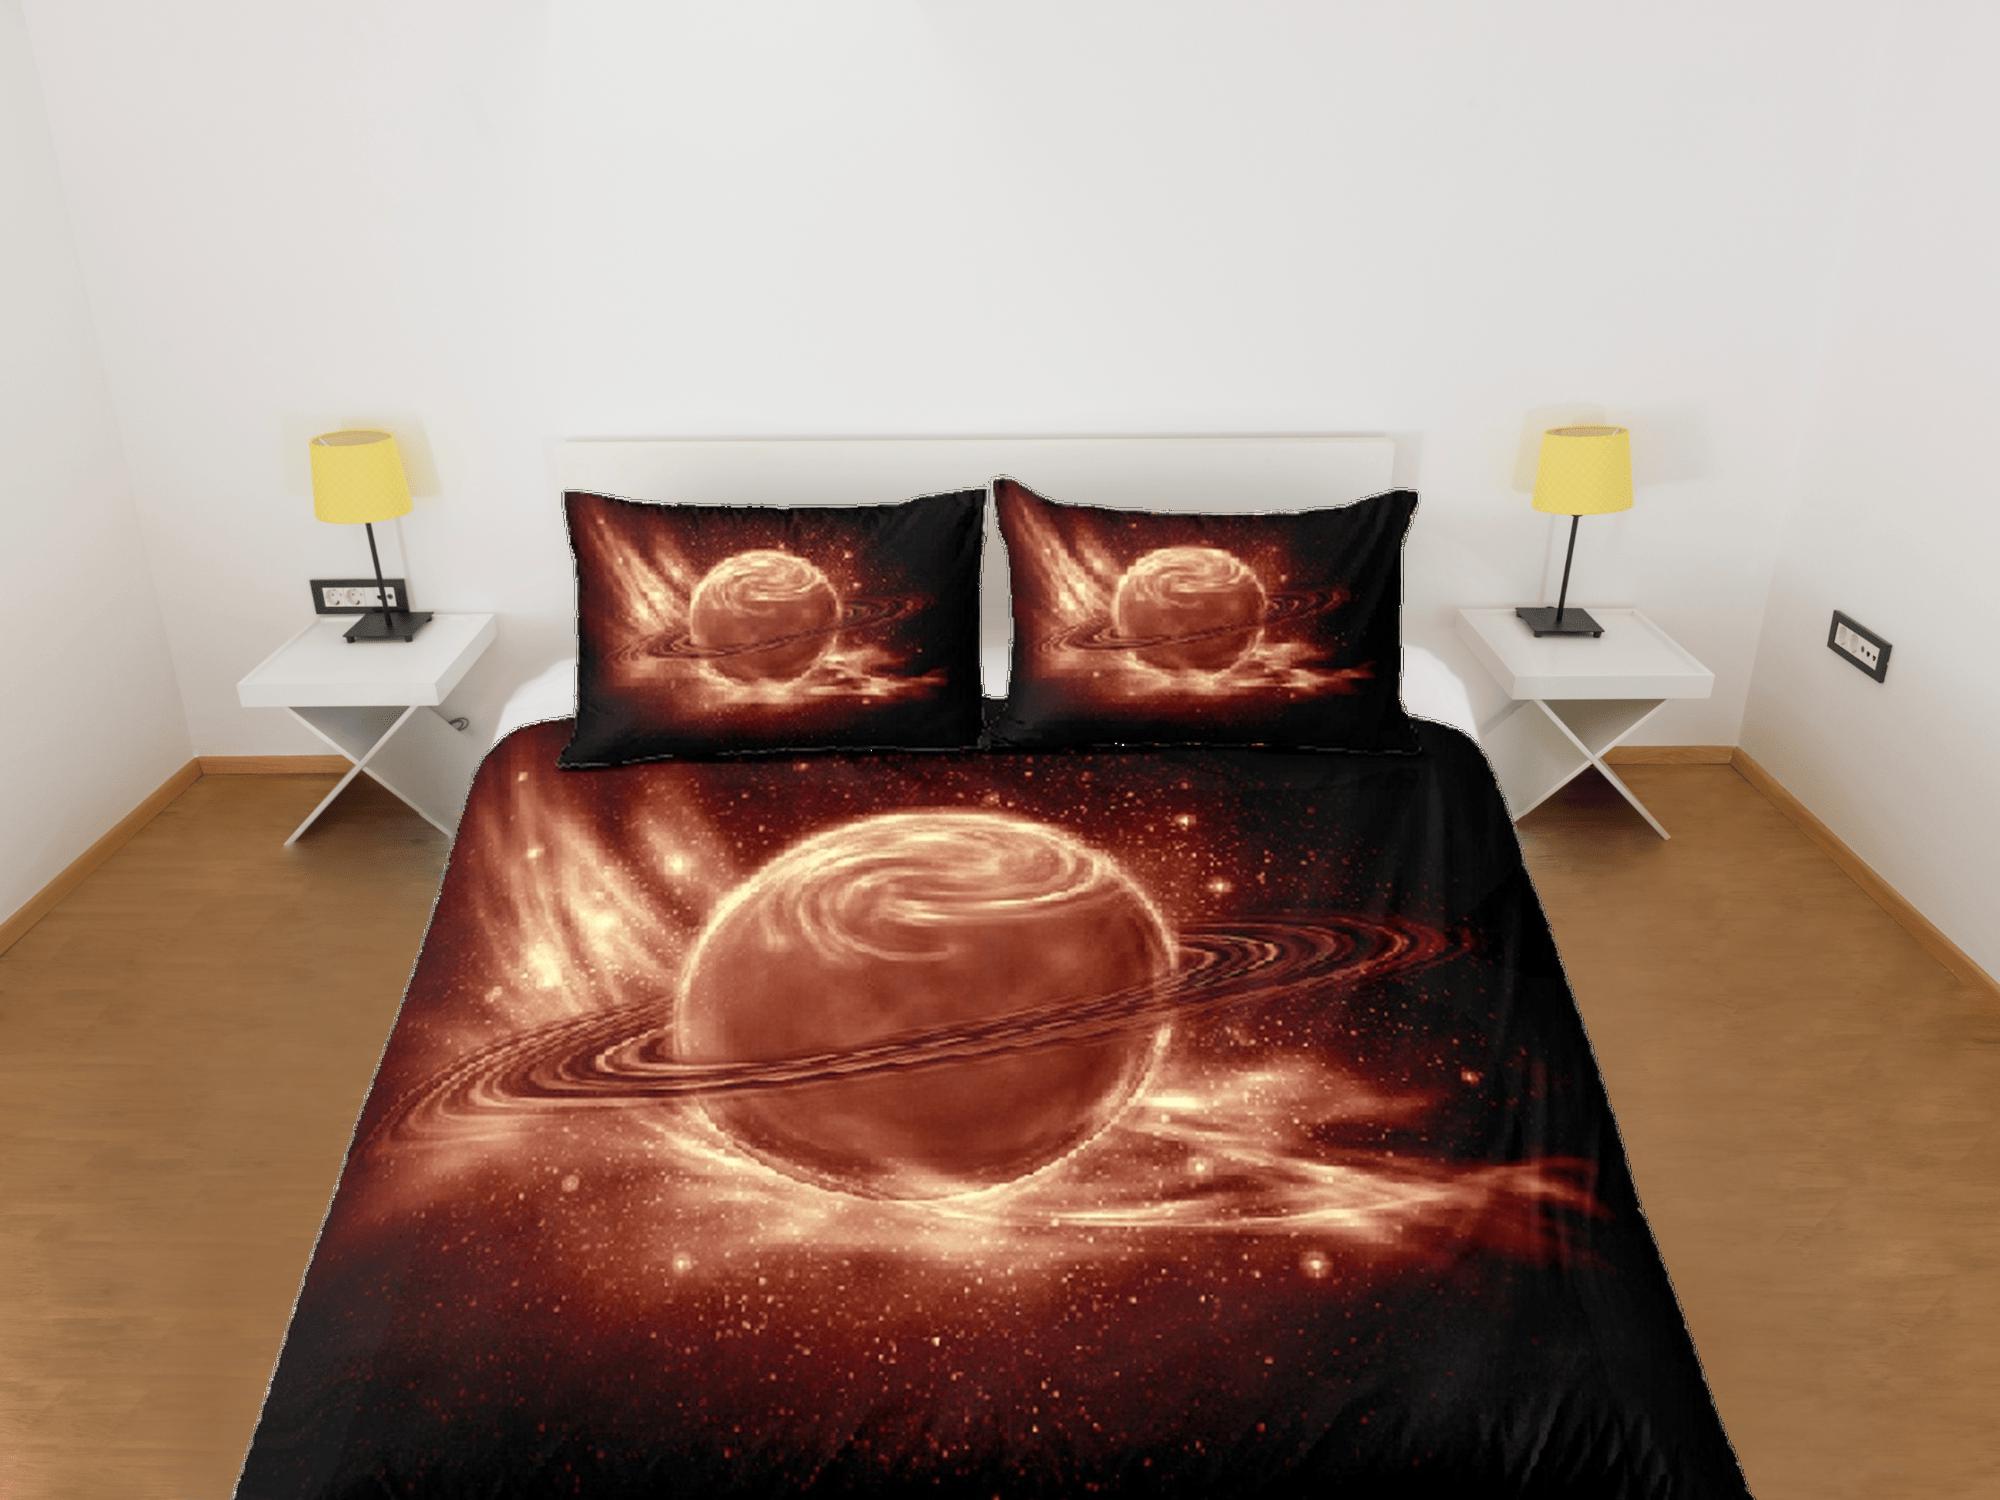 daintyduvet Rustic planet duvet cover set, Saturn galaxy bedding, outer space bedding set full, duvet cover king, queen, dorm bedding, toddler bedding